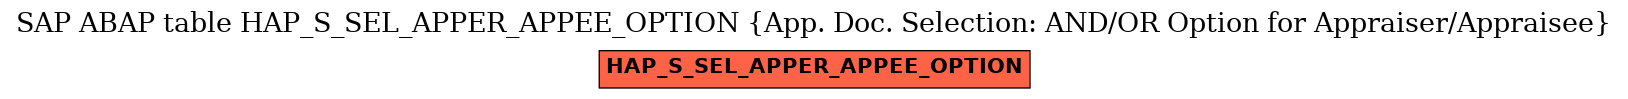 E-R Diagram for table HAP_S_SEL_APPER_APPEE_OPTION (App. Doc. Selection: AND/OR Option for Appraiser/Appraisee)